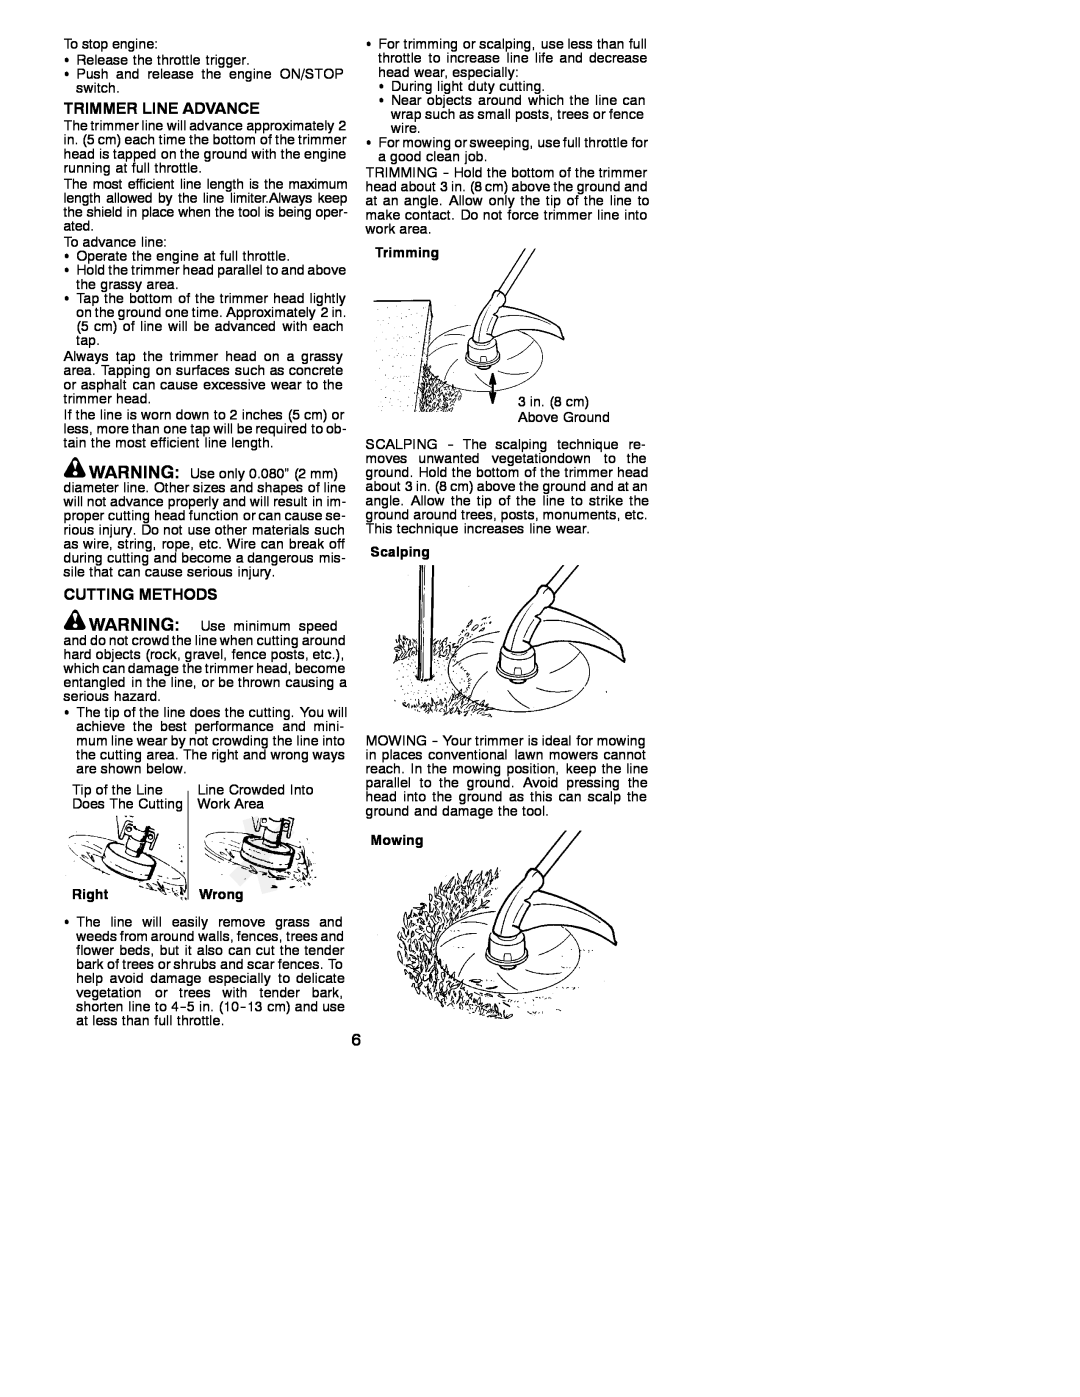 Weed Eater 530086922 instruction manual Trimmer Line Advance, Cutting Methods, Trimming, Scalping, Right, Mowing 